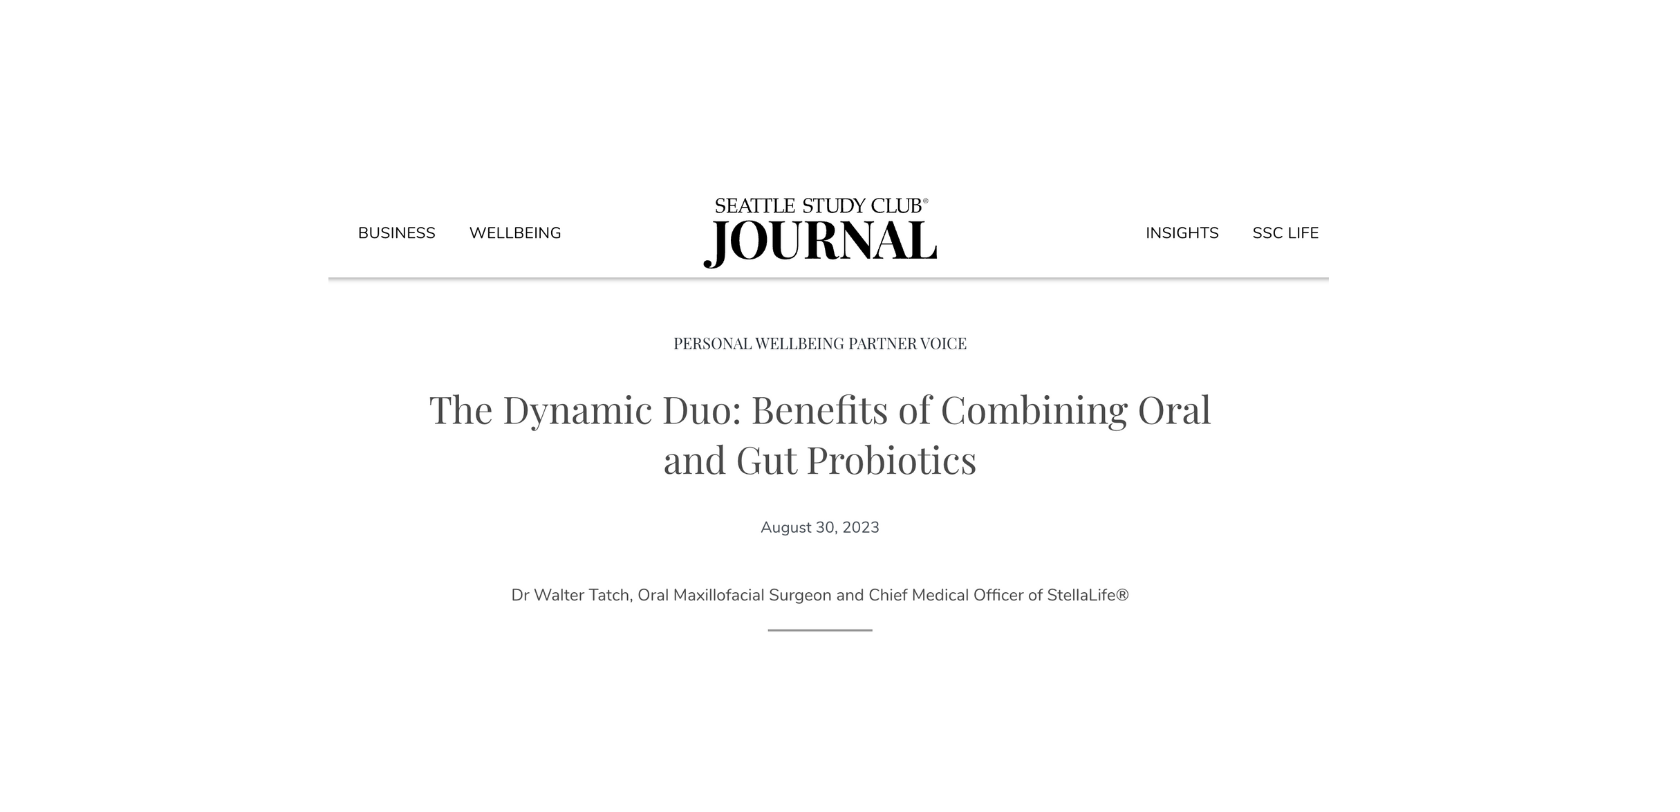 The Dynamic Duo: Benefits of Combining Oral and Gut Probiotics Image